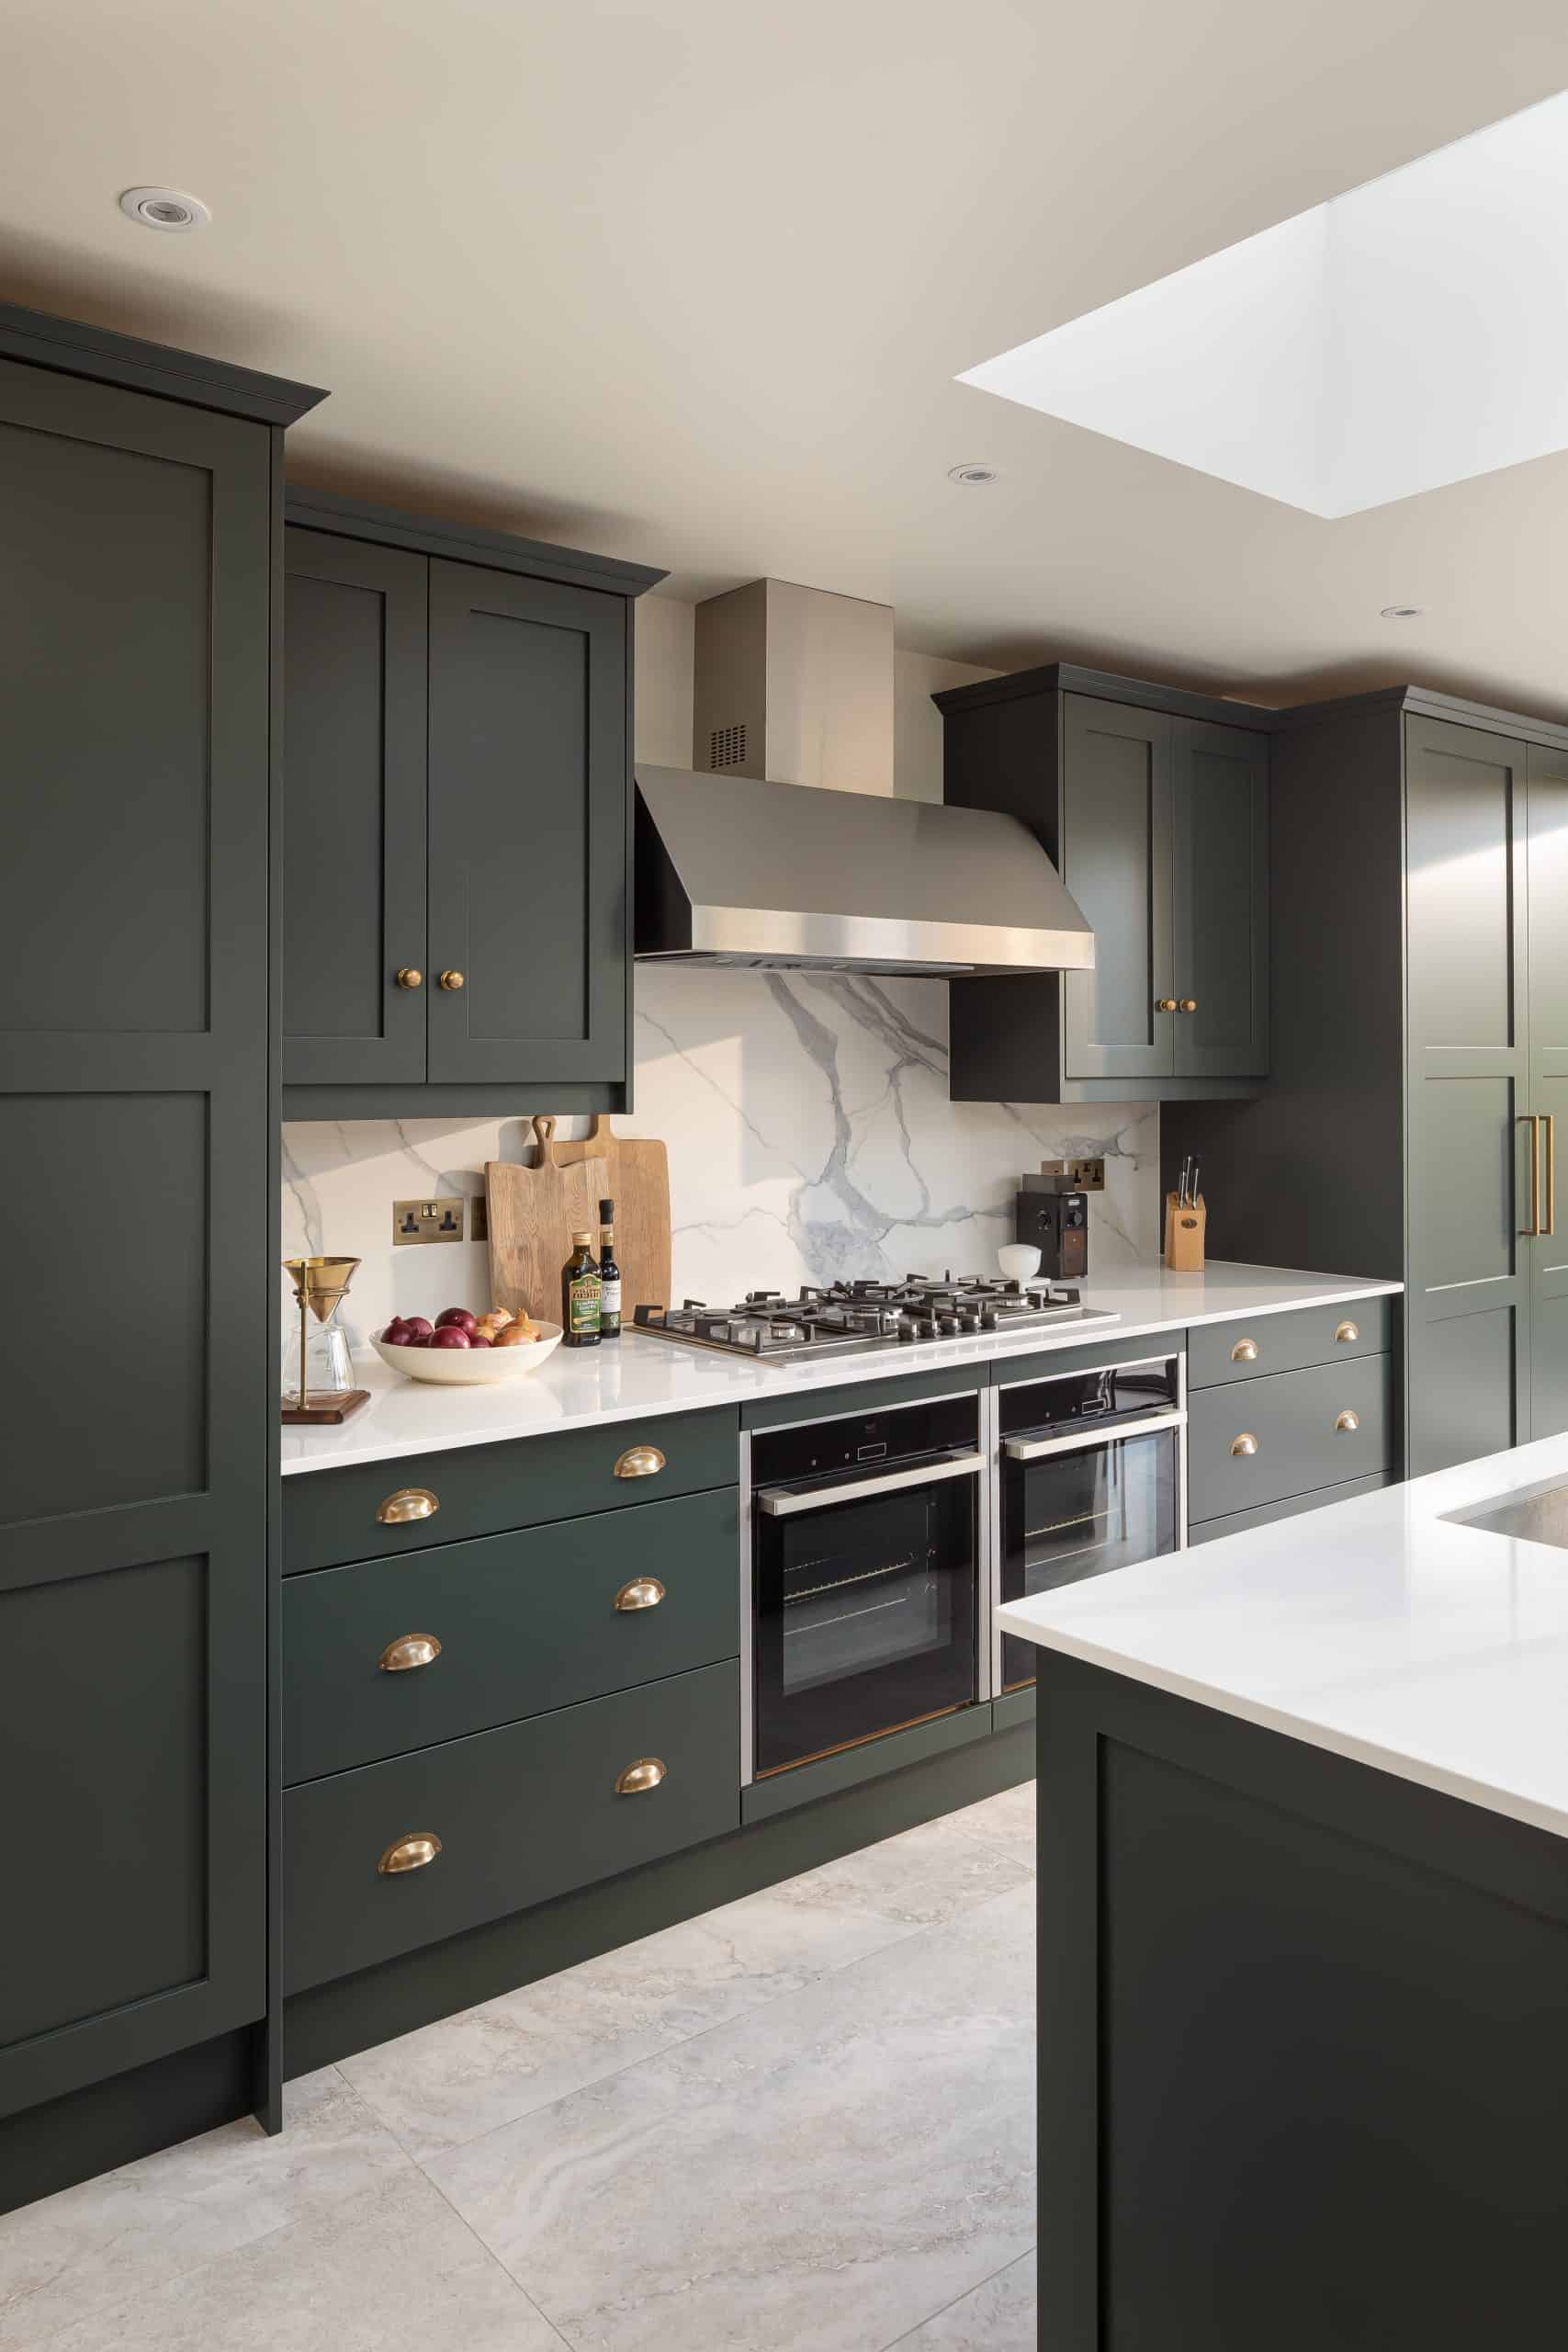 John Lewis of Hungerford luxury shaker kitchen in deep green with marble splashback and white worktops and kitchen island with brass metal cabinetry handles